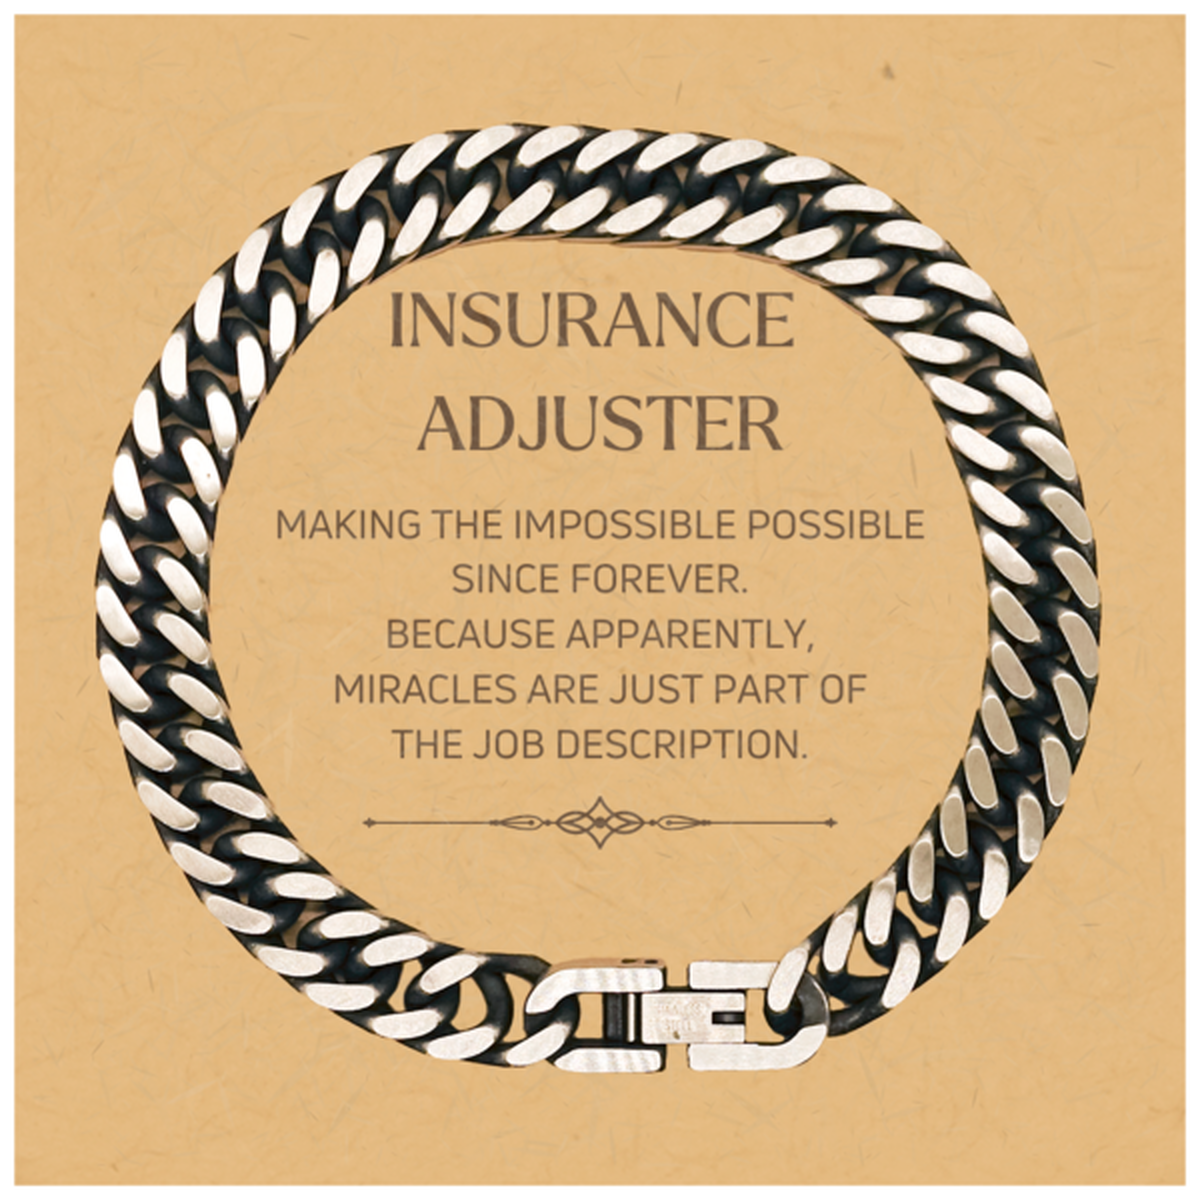 Funny Insurance Adjuster Gifts, Miracles are just part of the job description, Inspirational Birthday Christmas Cuban Link Chain Bracelet For Insurance Adjuster, Men, Women, Coworkers, Friends, Boss